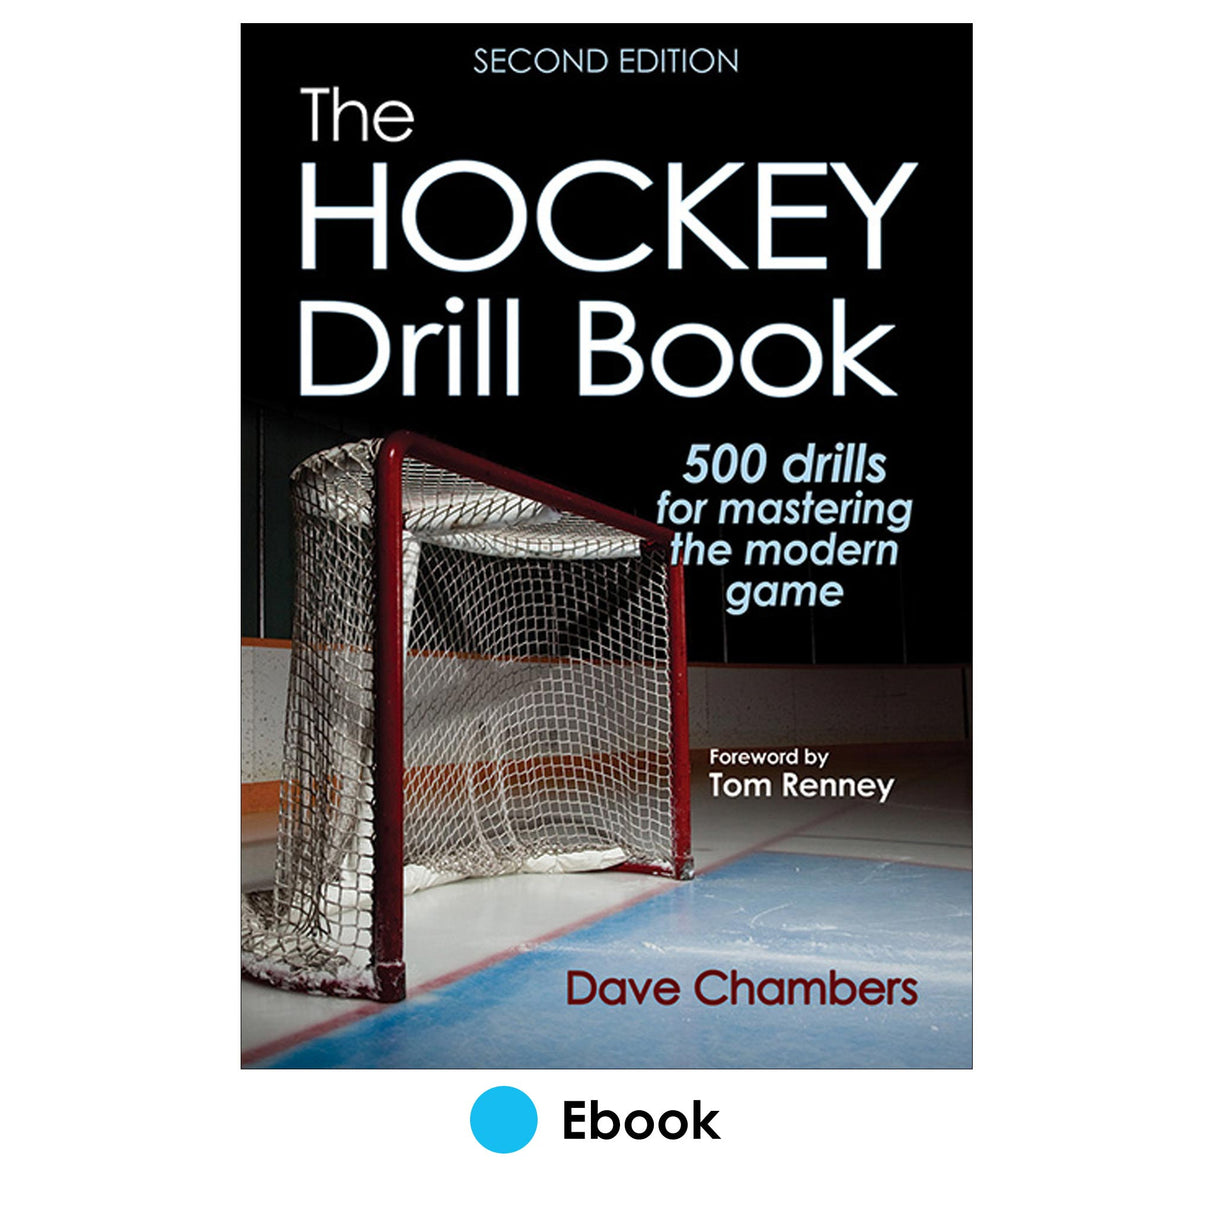 Hockey Drill Book 2nd Edition PDF, The